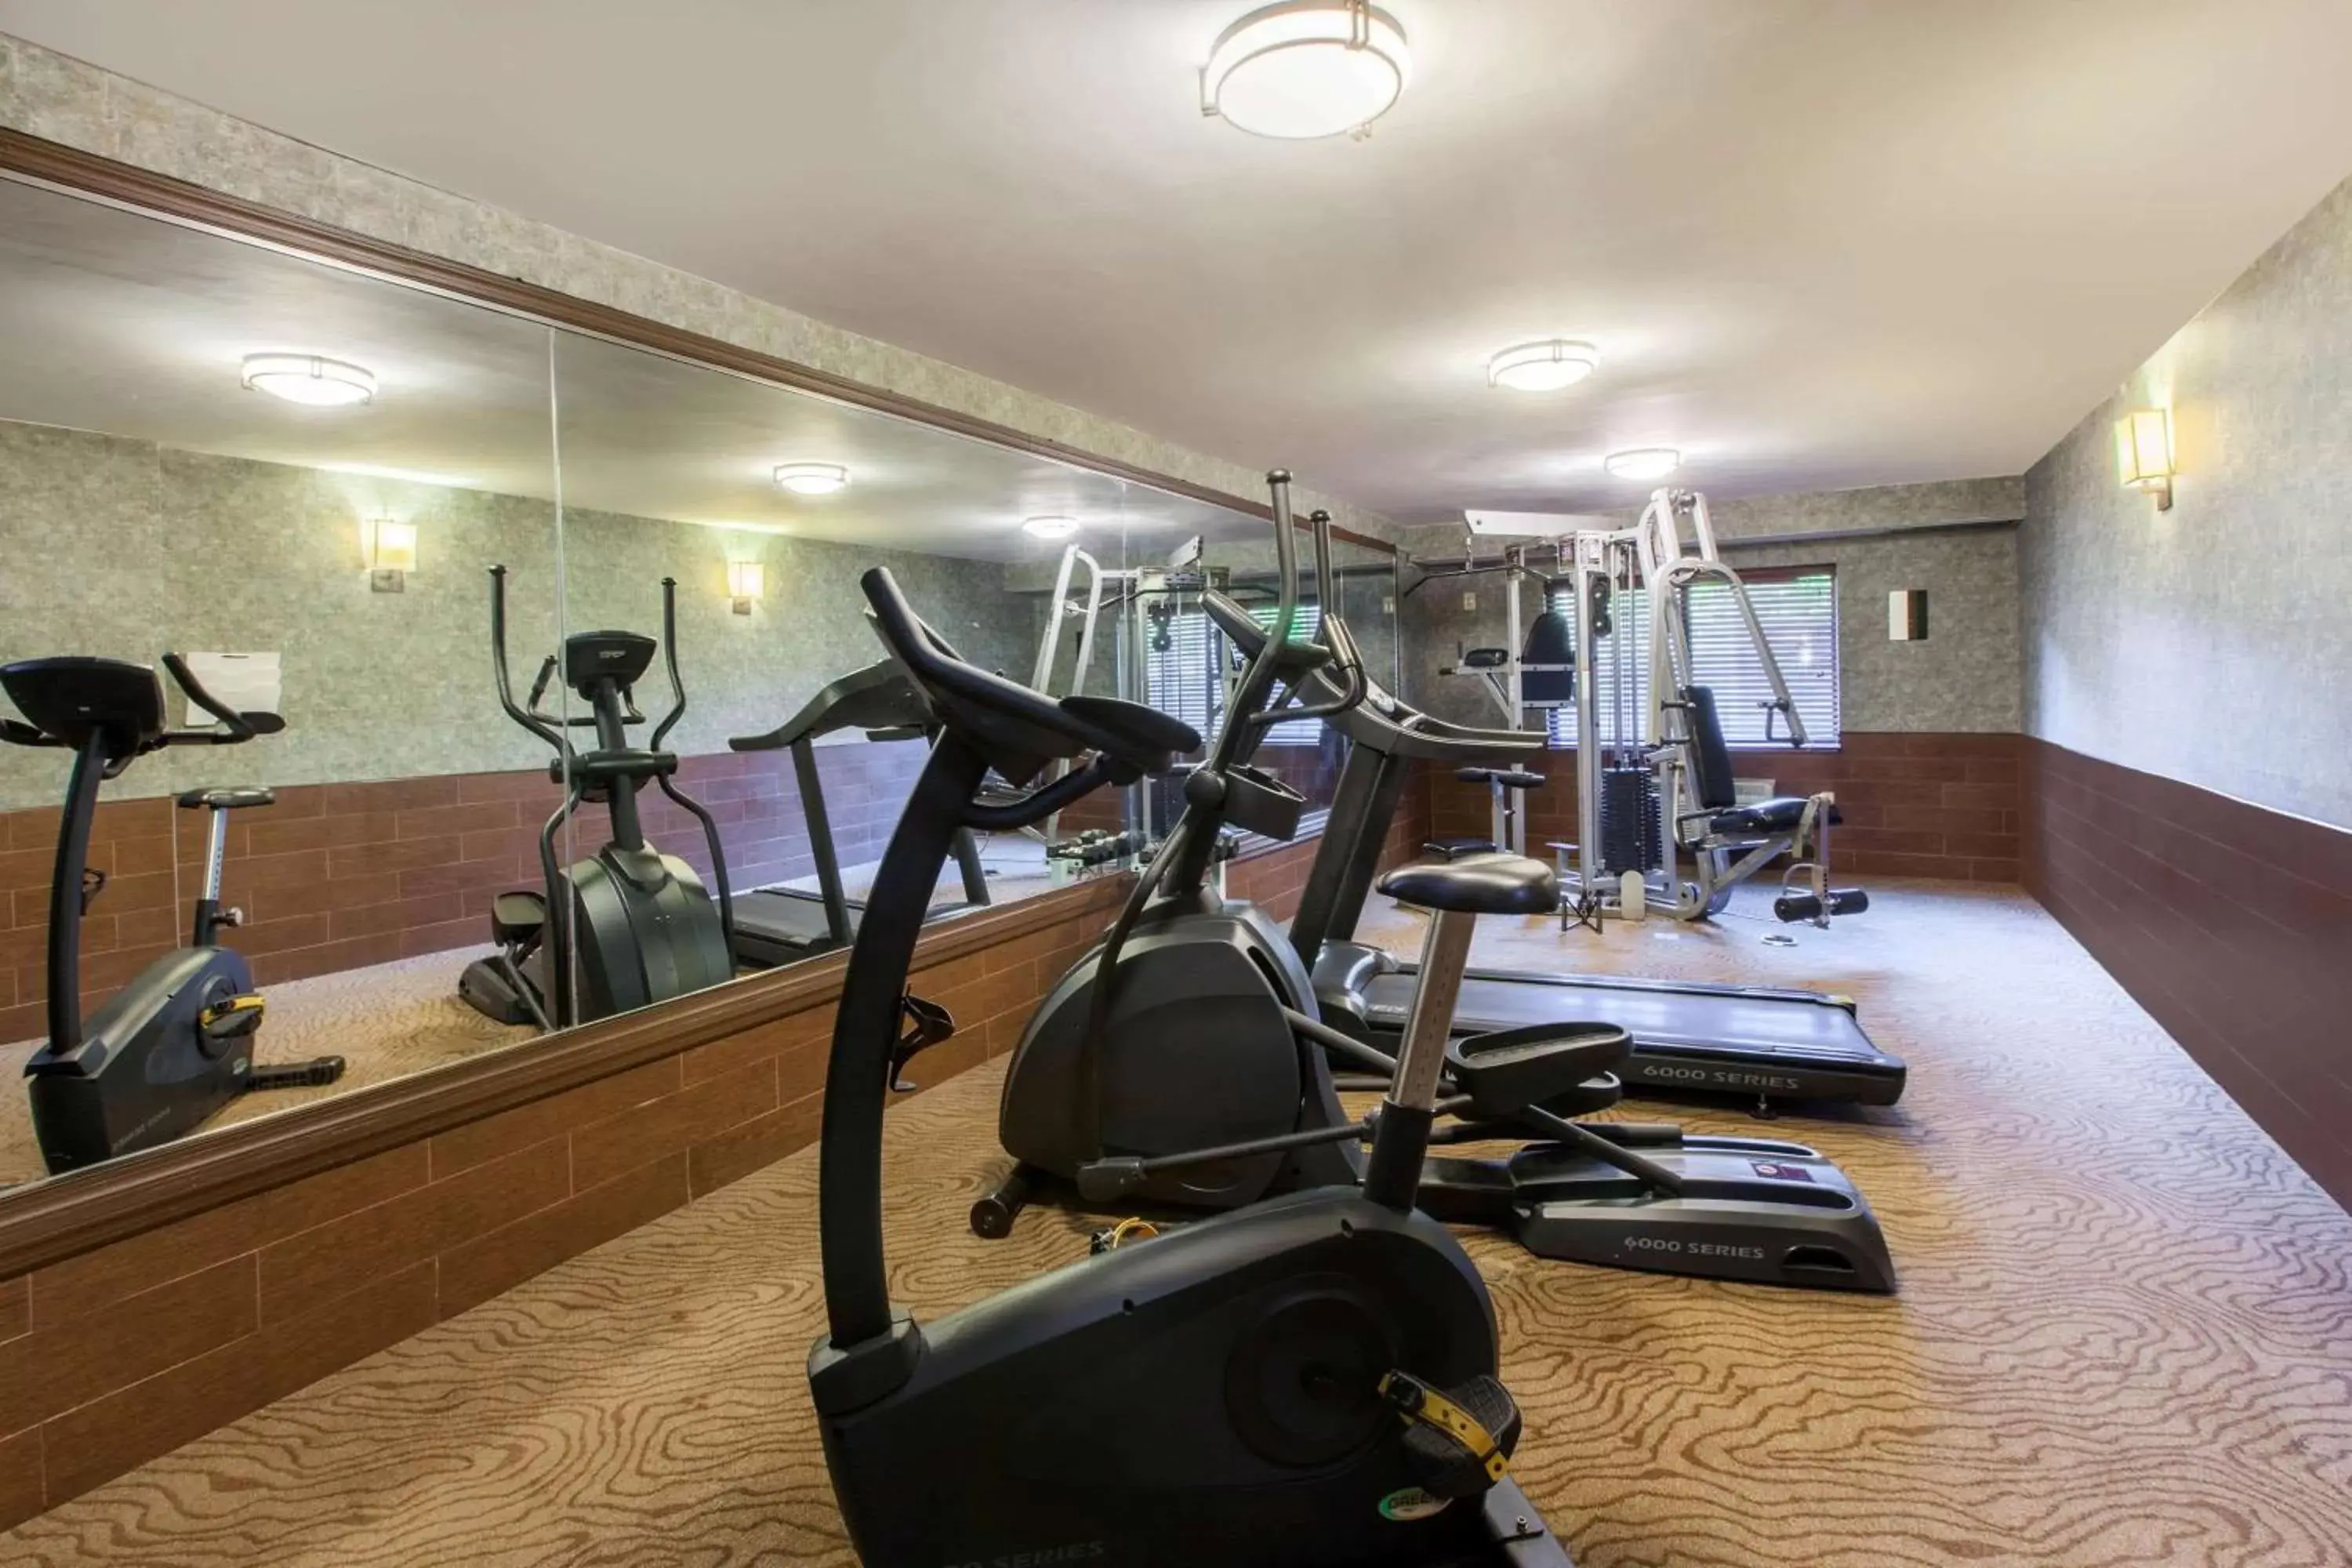 Fitness centre/facilities, Fitness Center/Facilities in Baymont by Wyndham Pompton Plains/Wayne